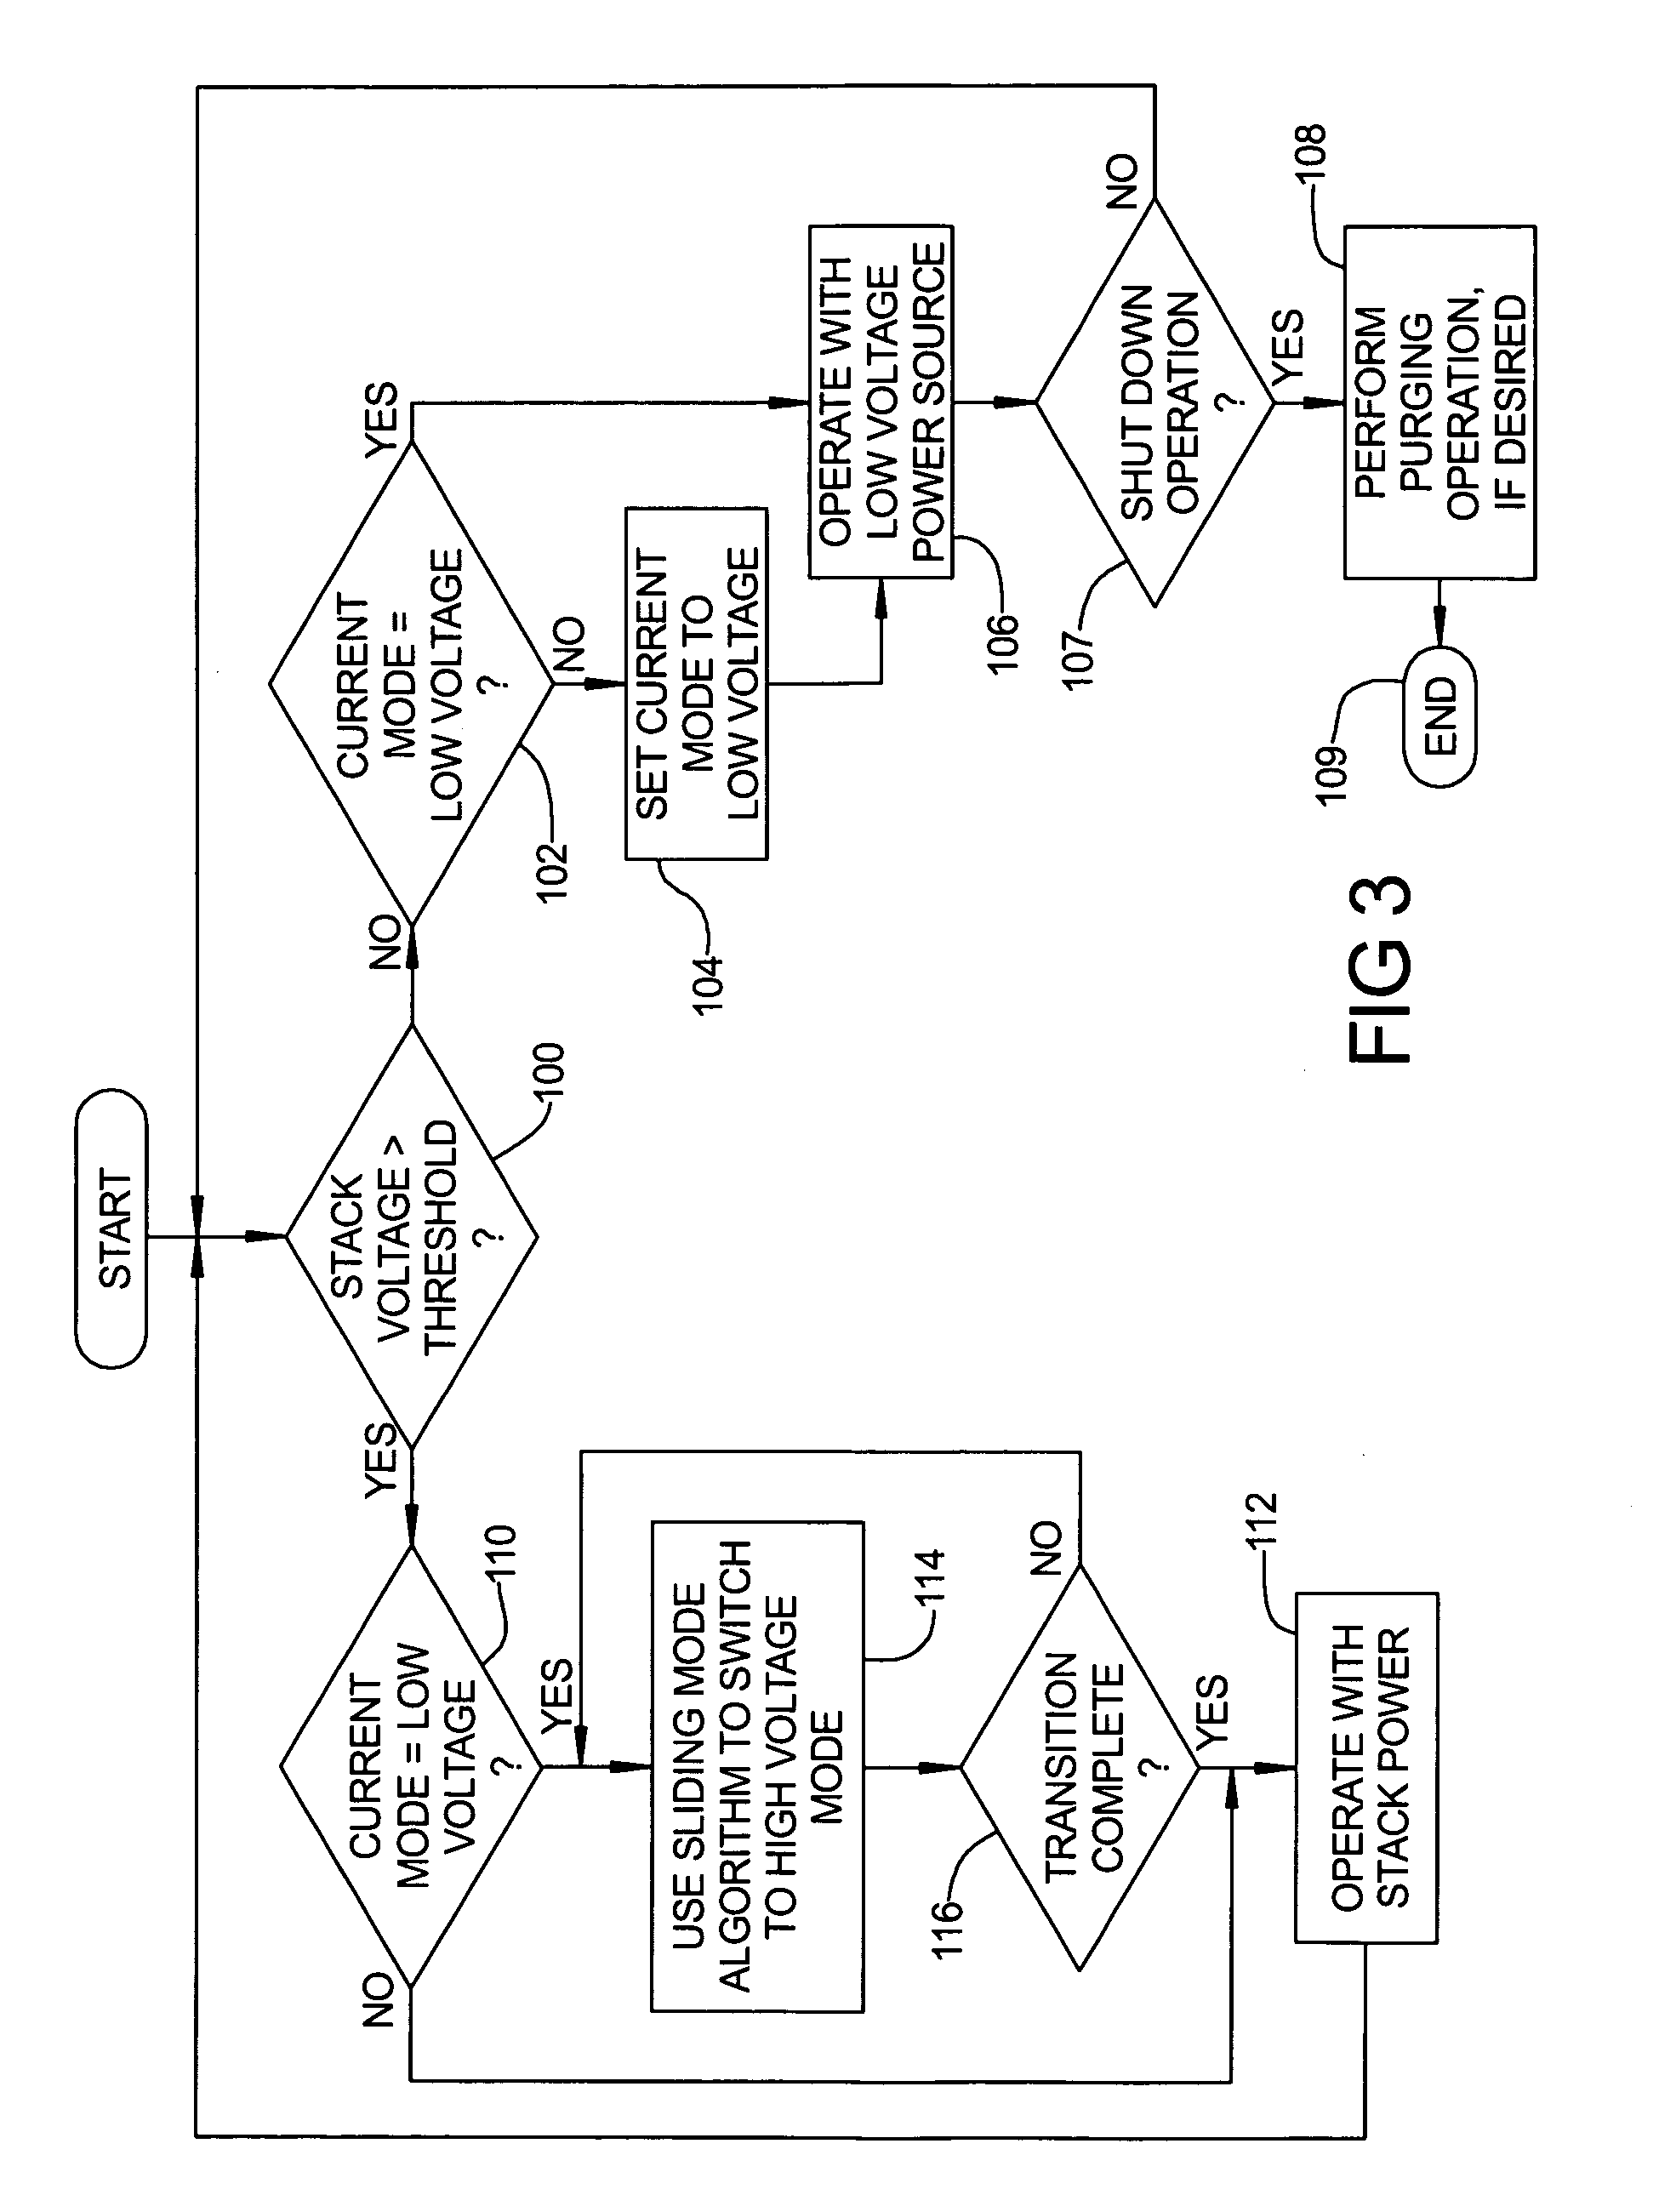 Low voltage compressor operation for a fuel cell power system